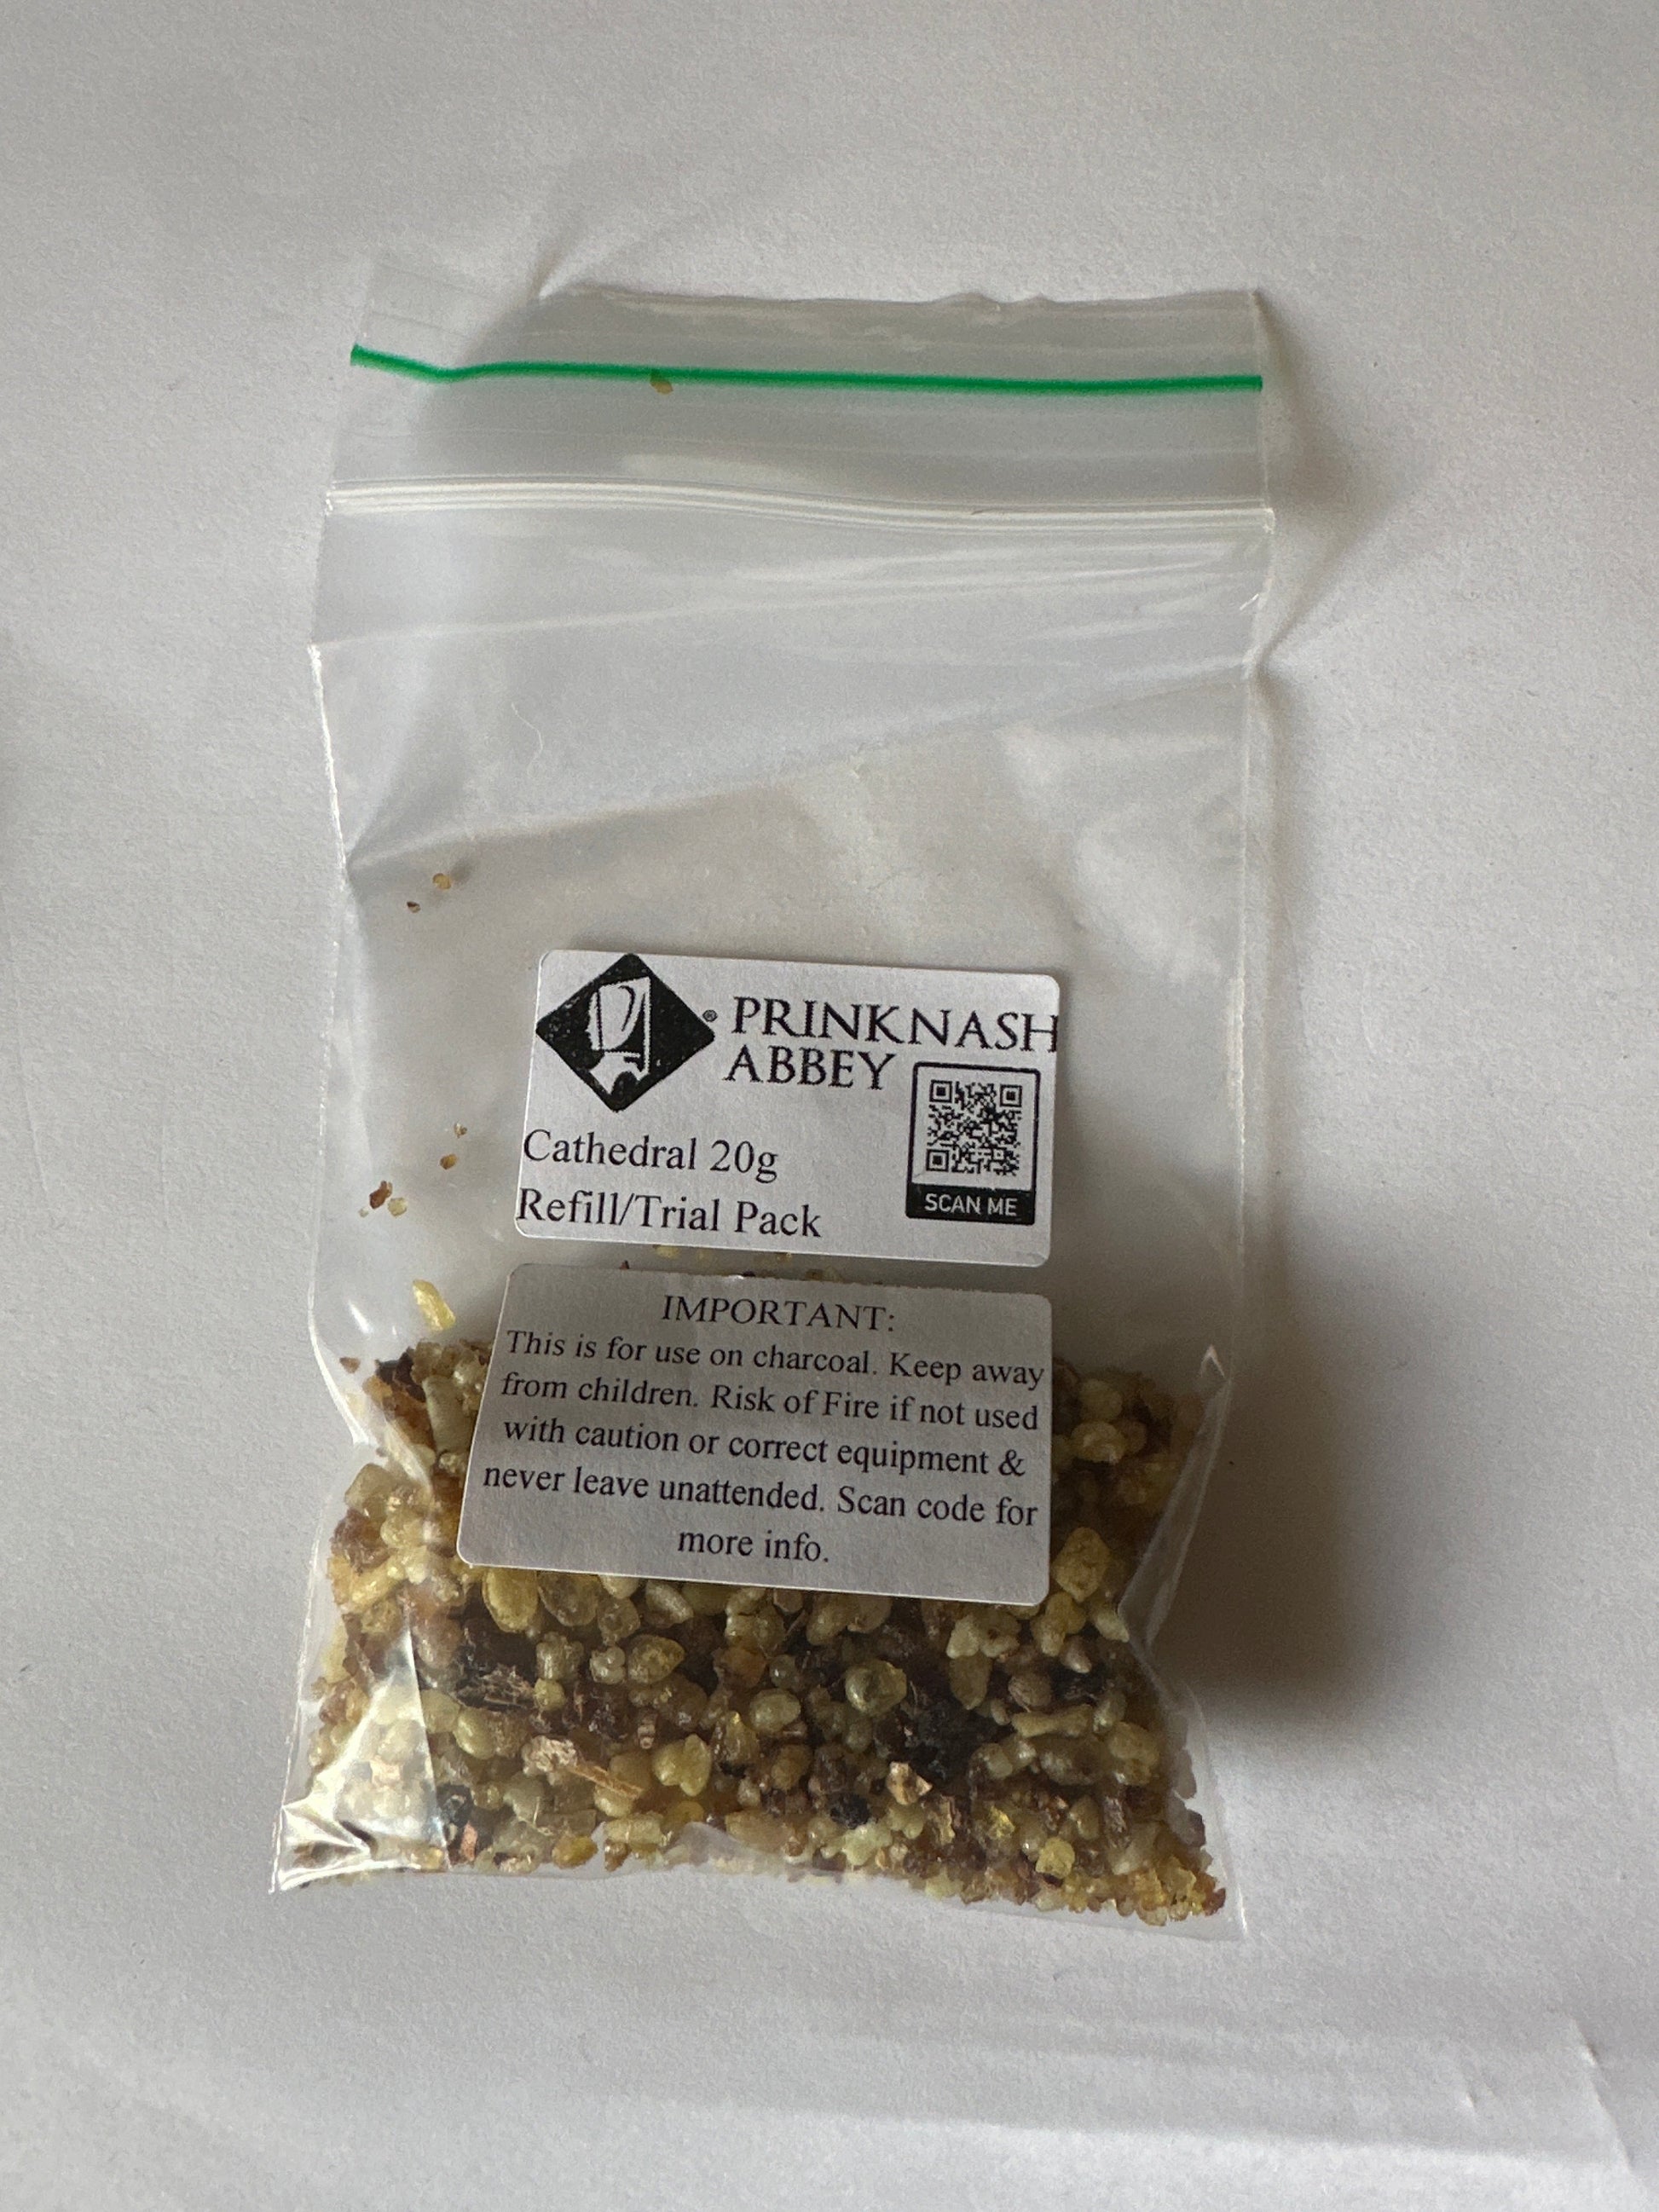 Genuine Prinknash Abbey incense Samples Kit 1. 20g of all 6 blends. You save 50% - CritchCorp Retail & Wholesale